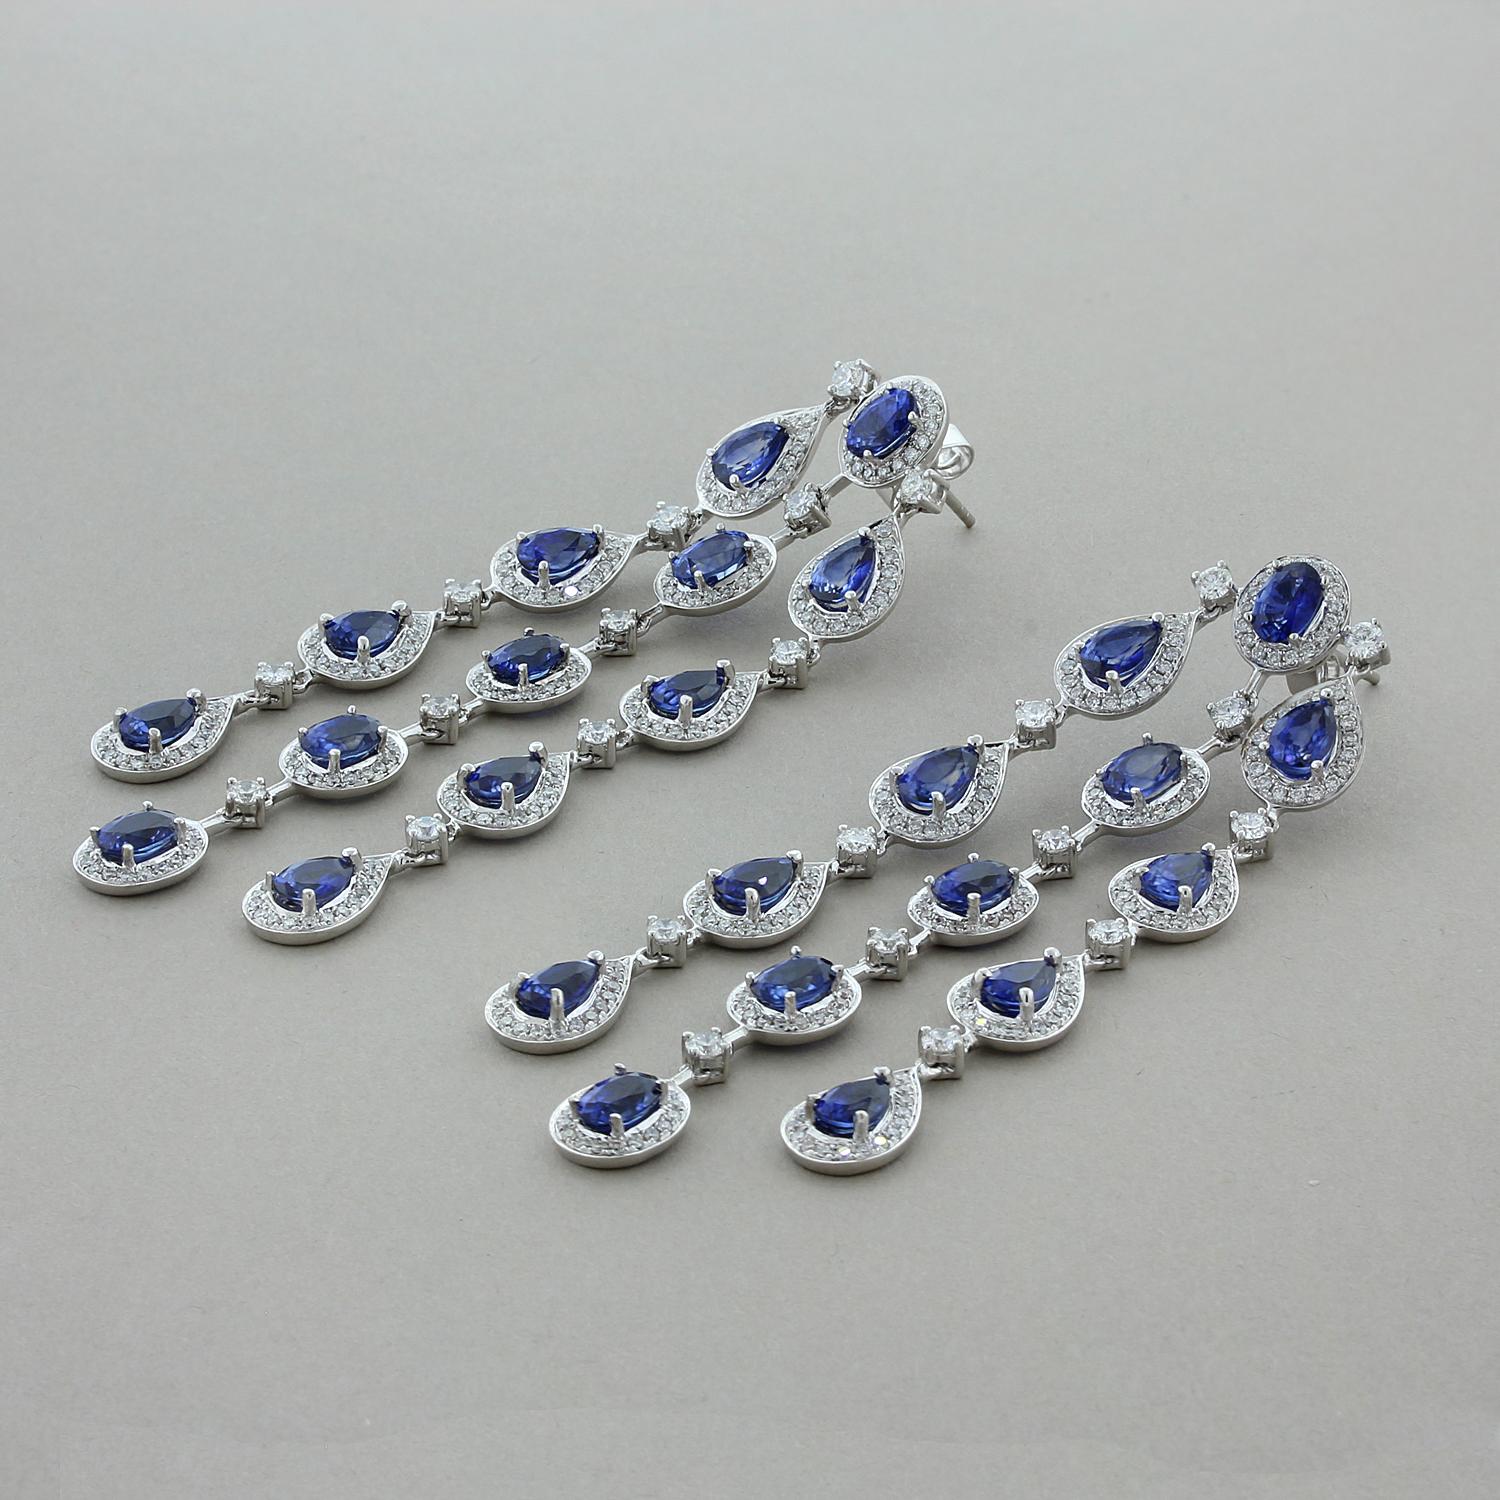 Three chandelier drops of 15.27 carats oval and pear cut blue sapphires adorn this pair of dancing earrings. Each of the deep ocean blue sapphires are haloed and linked by 4.36 carts of VS quality colorless diamonds. The delicate rainfall style of